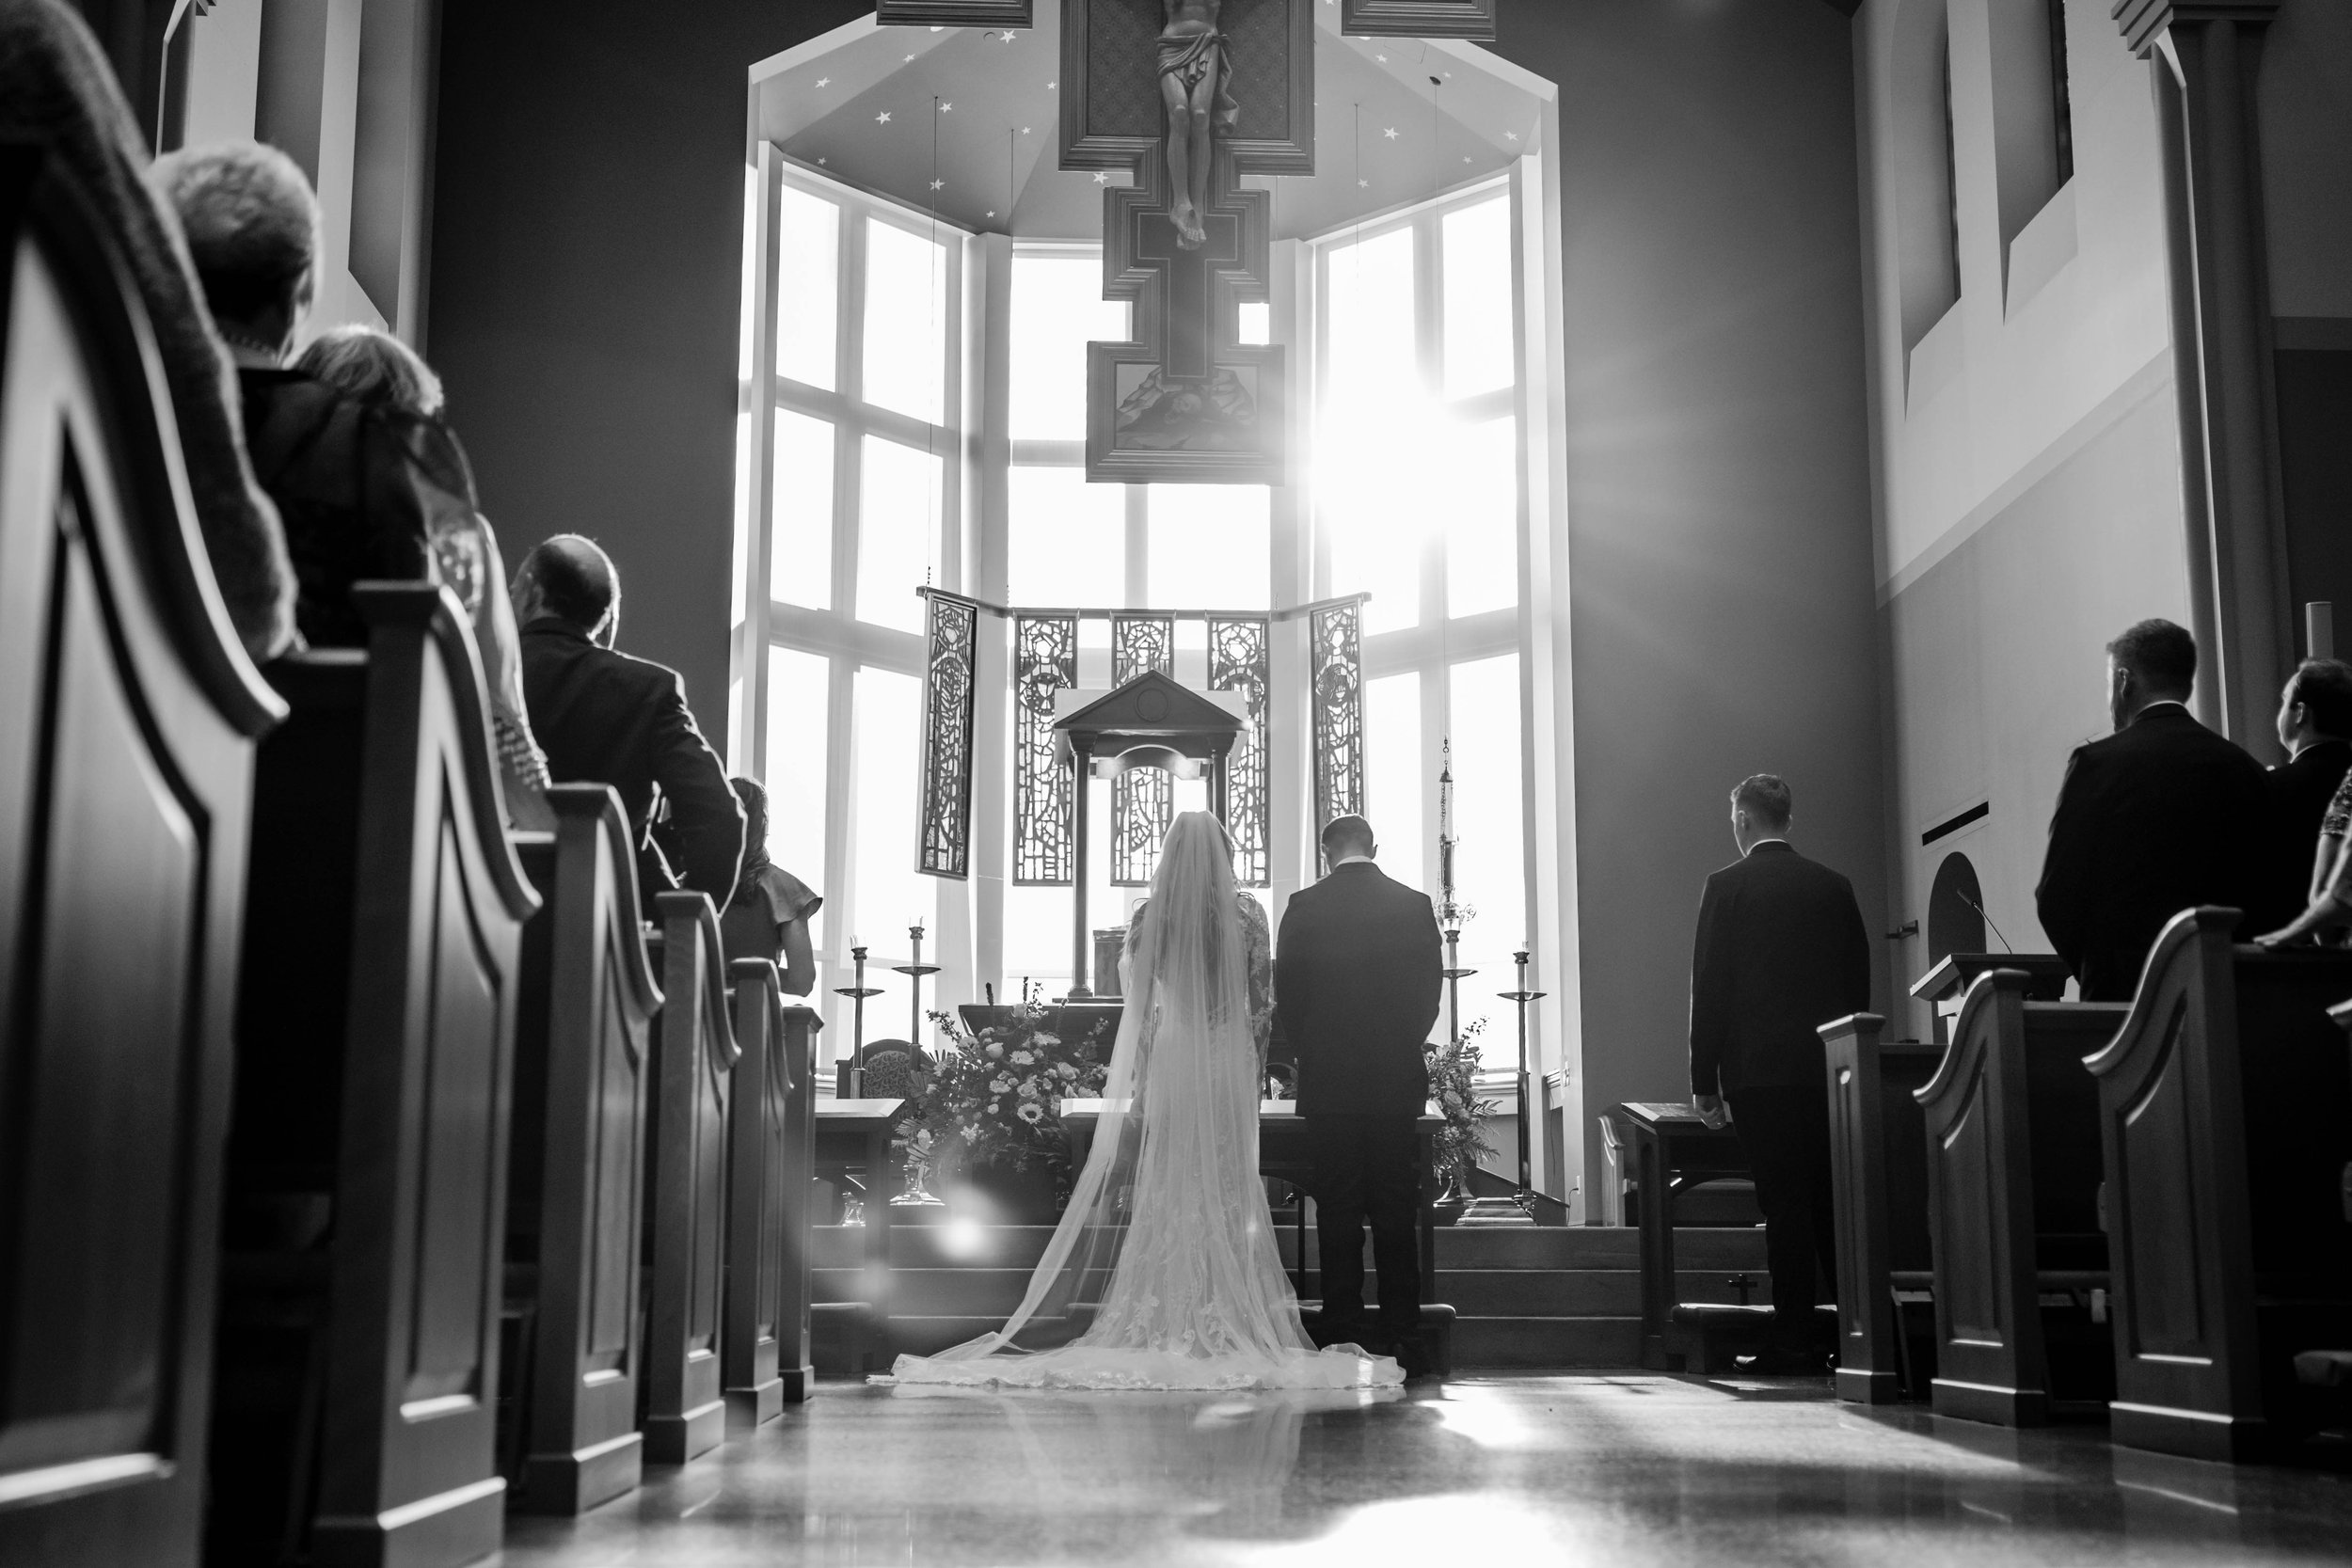 affordable-wedding-photography-services-top-rated-wedding-photographers-near-me-myrtle-beach-sc-02.jpg